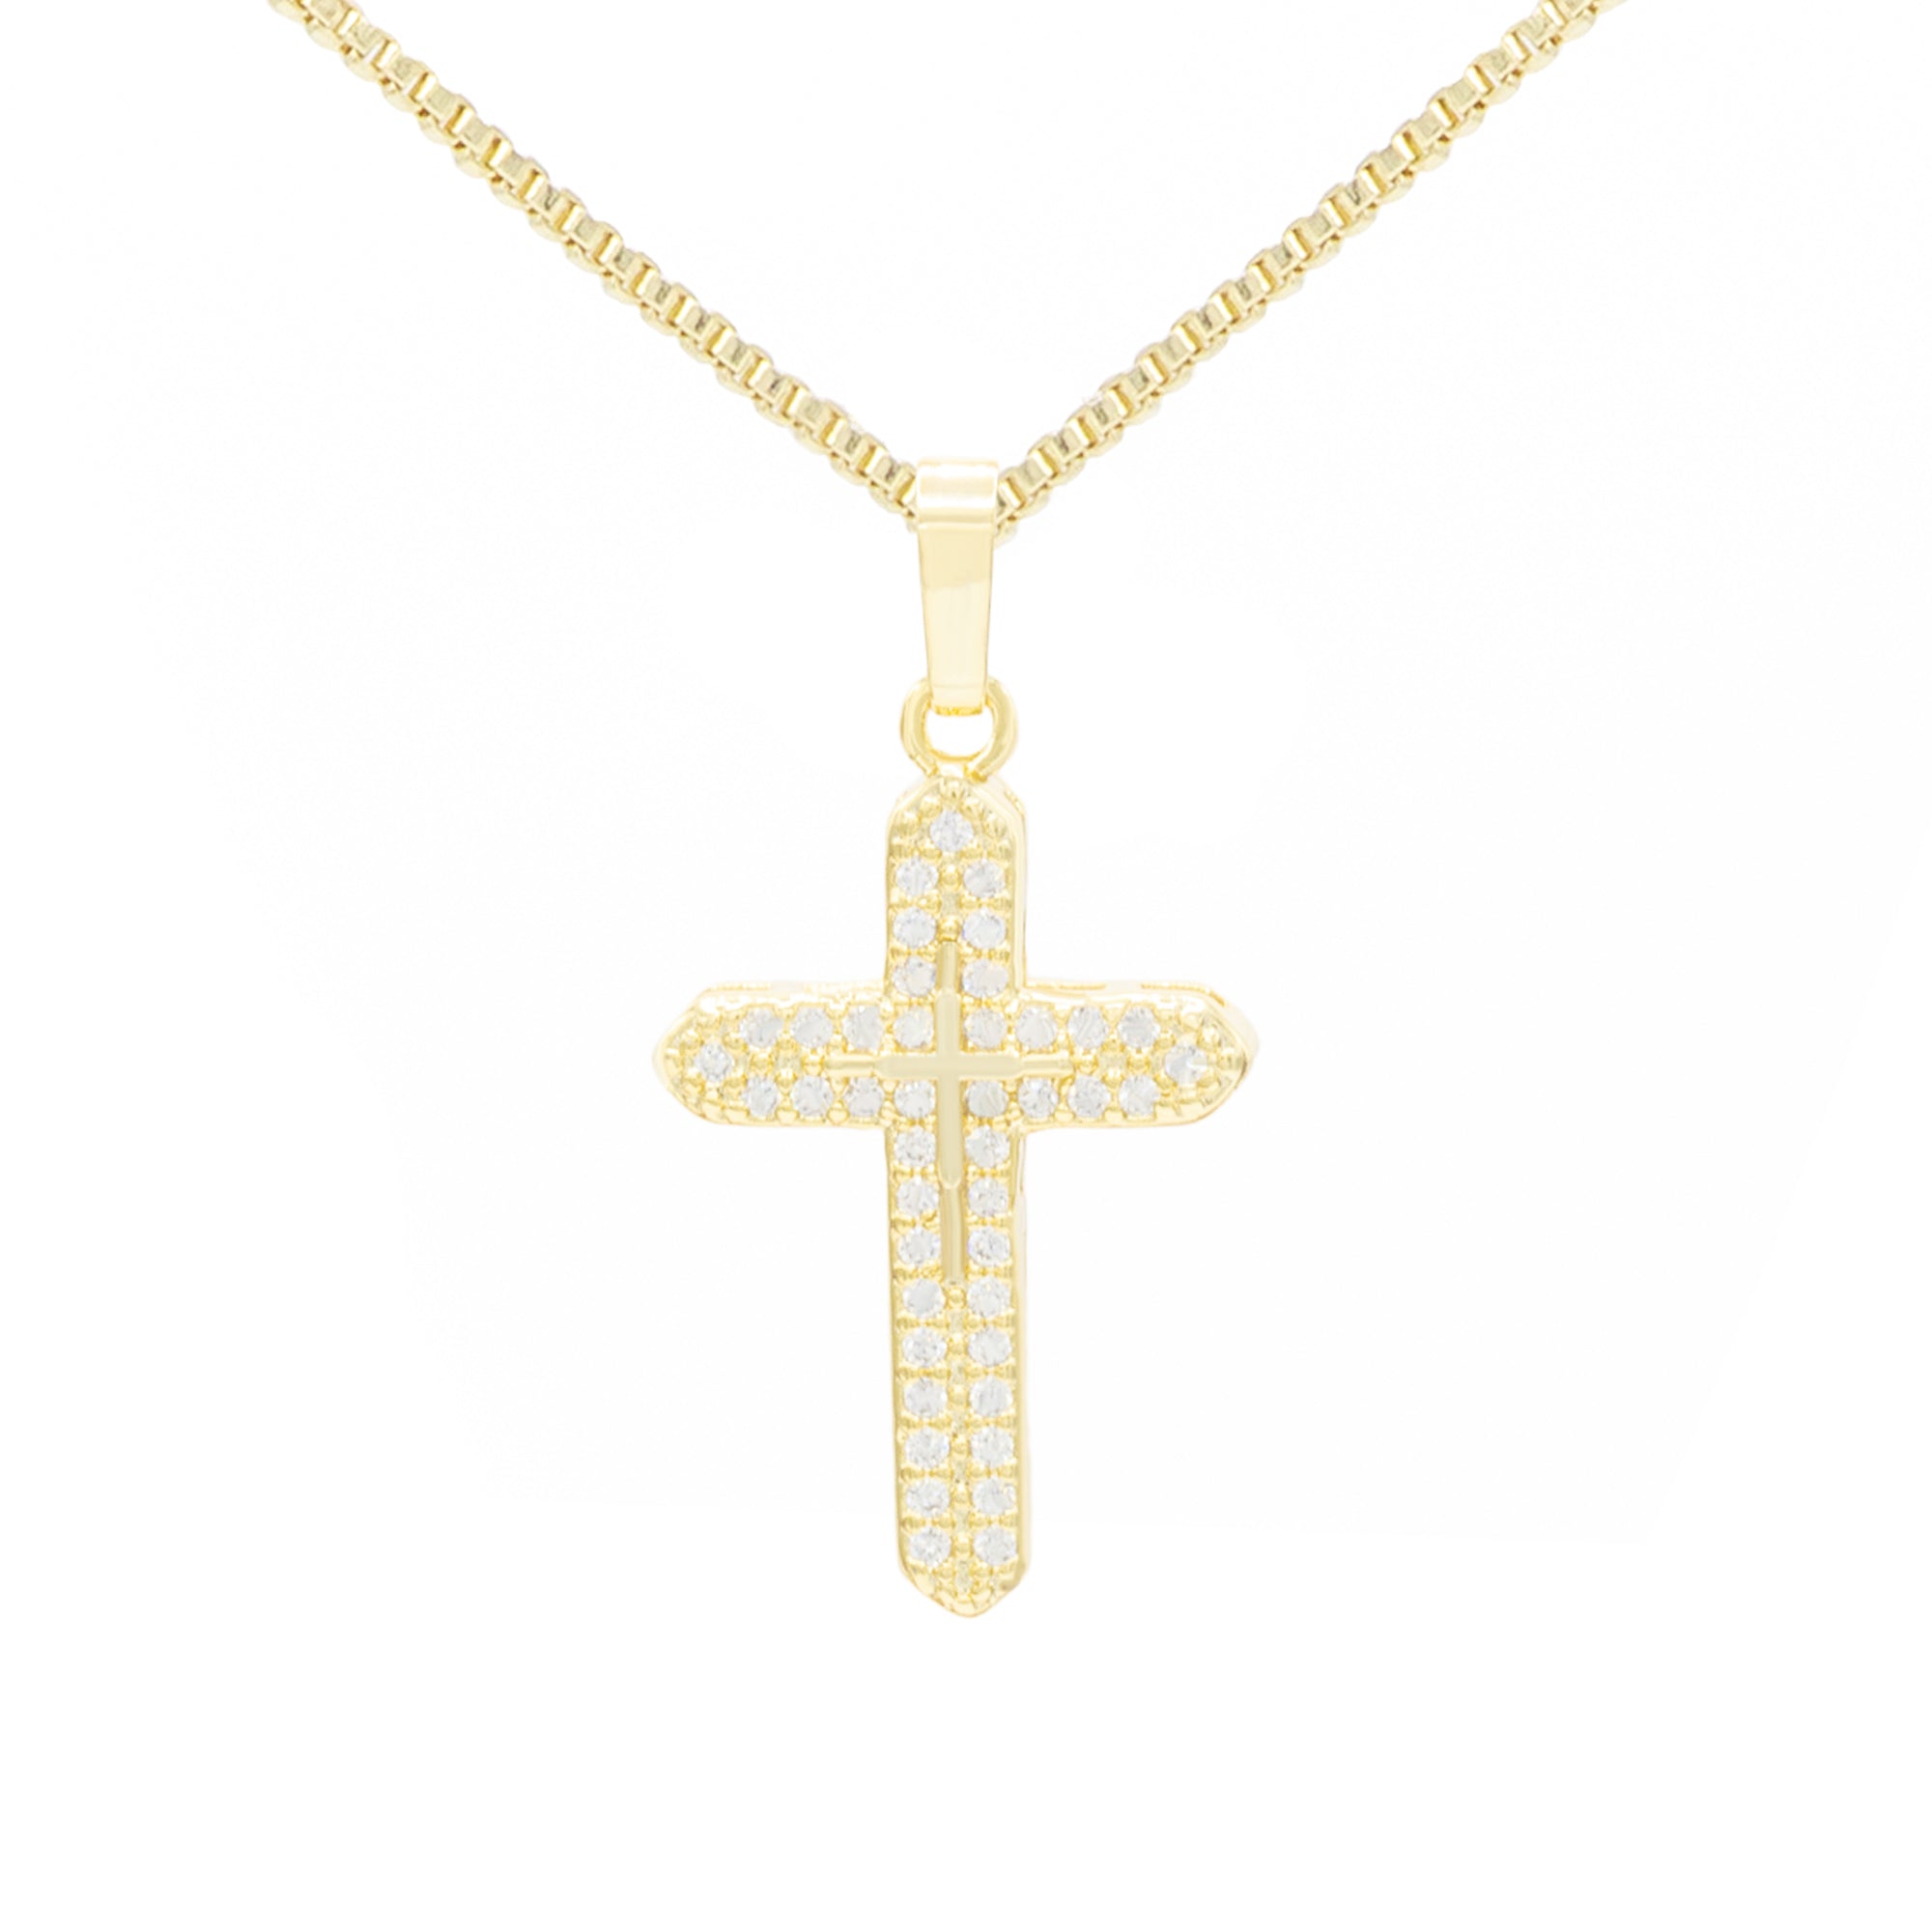 Cross 3 Cubic Zirconia Pendant With Necklace Set 14K Gold Filled